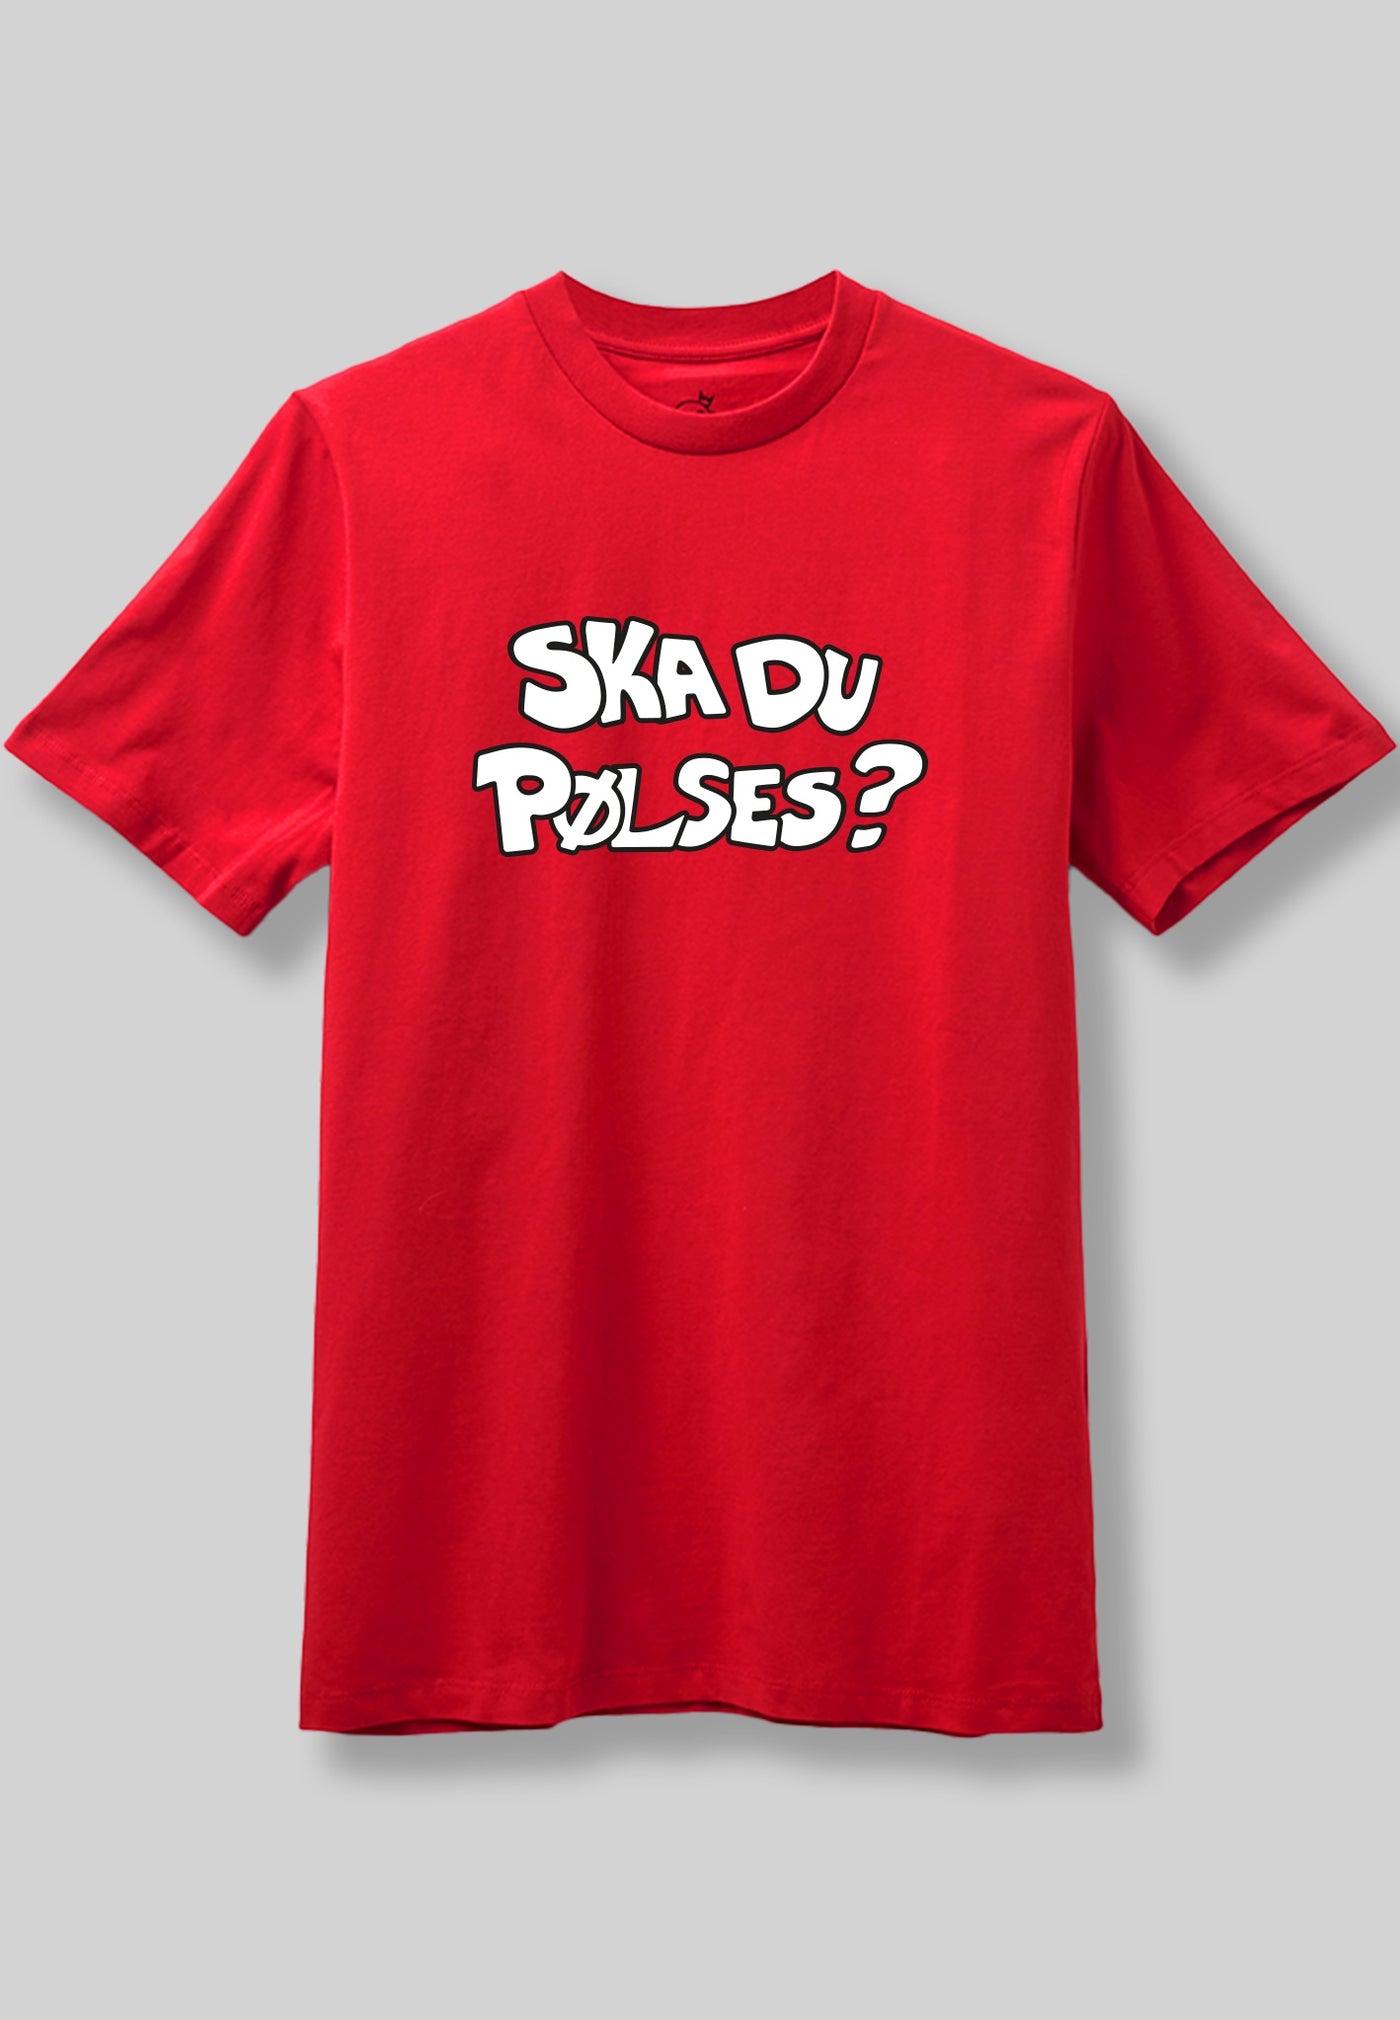 Ask Casper - Do you want a red sausage t-shirt